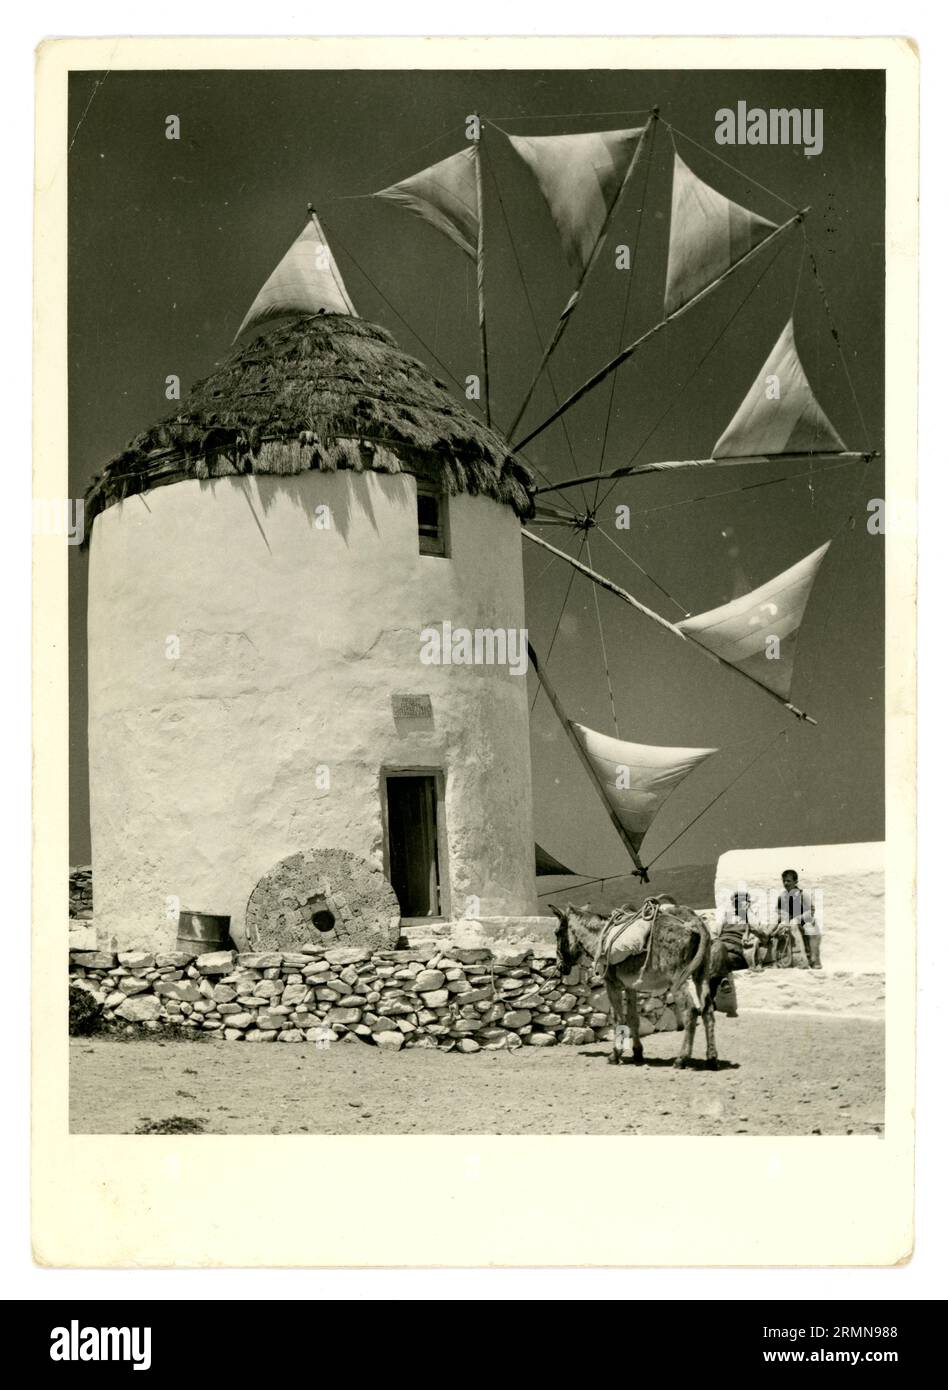 Original late 1950's early1960's souvenir postcard of windmill with working sails, used to mill wheat. Greek island of Mykonos, Cyclades, Greece, this image shows the last working years of this windmill. The windmills are iconic features of Mykonos. Stock Photo